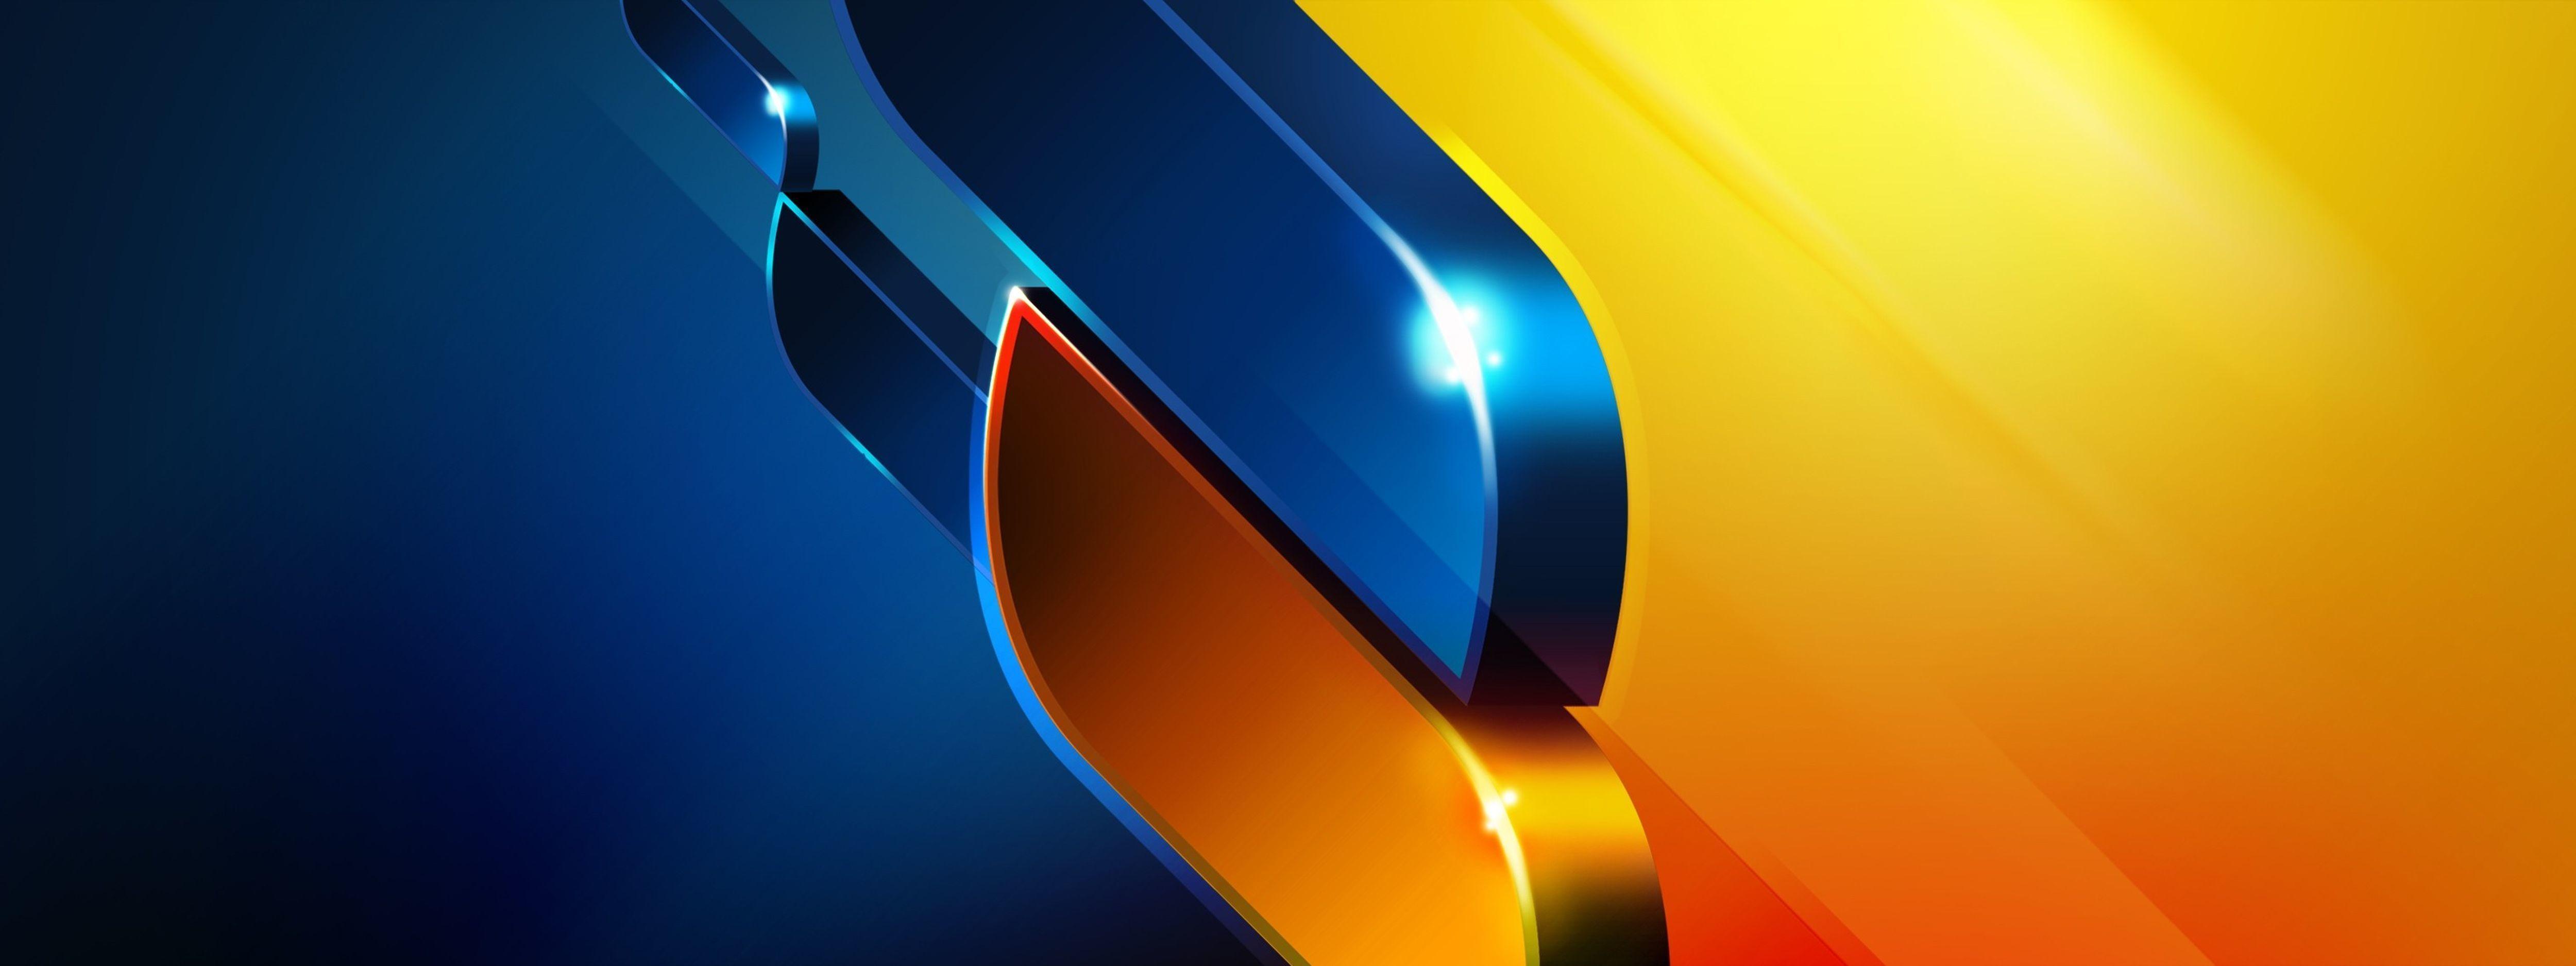 Wallpapers Firefox, Blue, Yellow, 3D, Abstract,